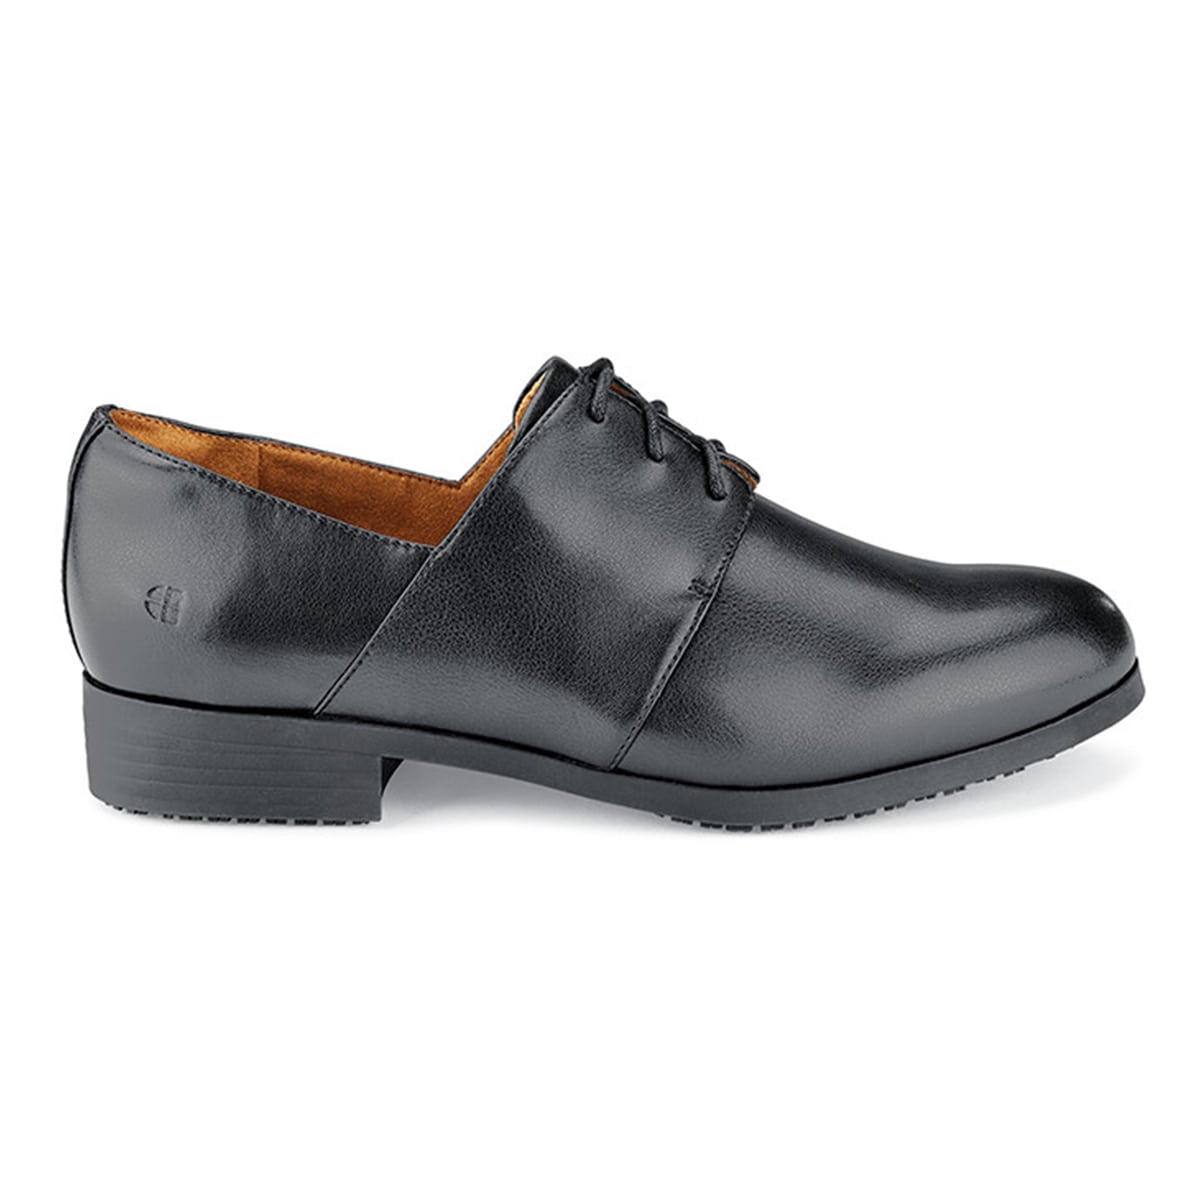 The Madison III from Shoes For Crews is an slip-resistant dress shoe designed to provide safety and security, seen from the right.